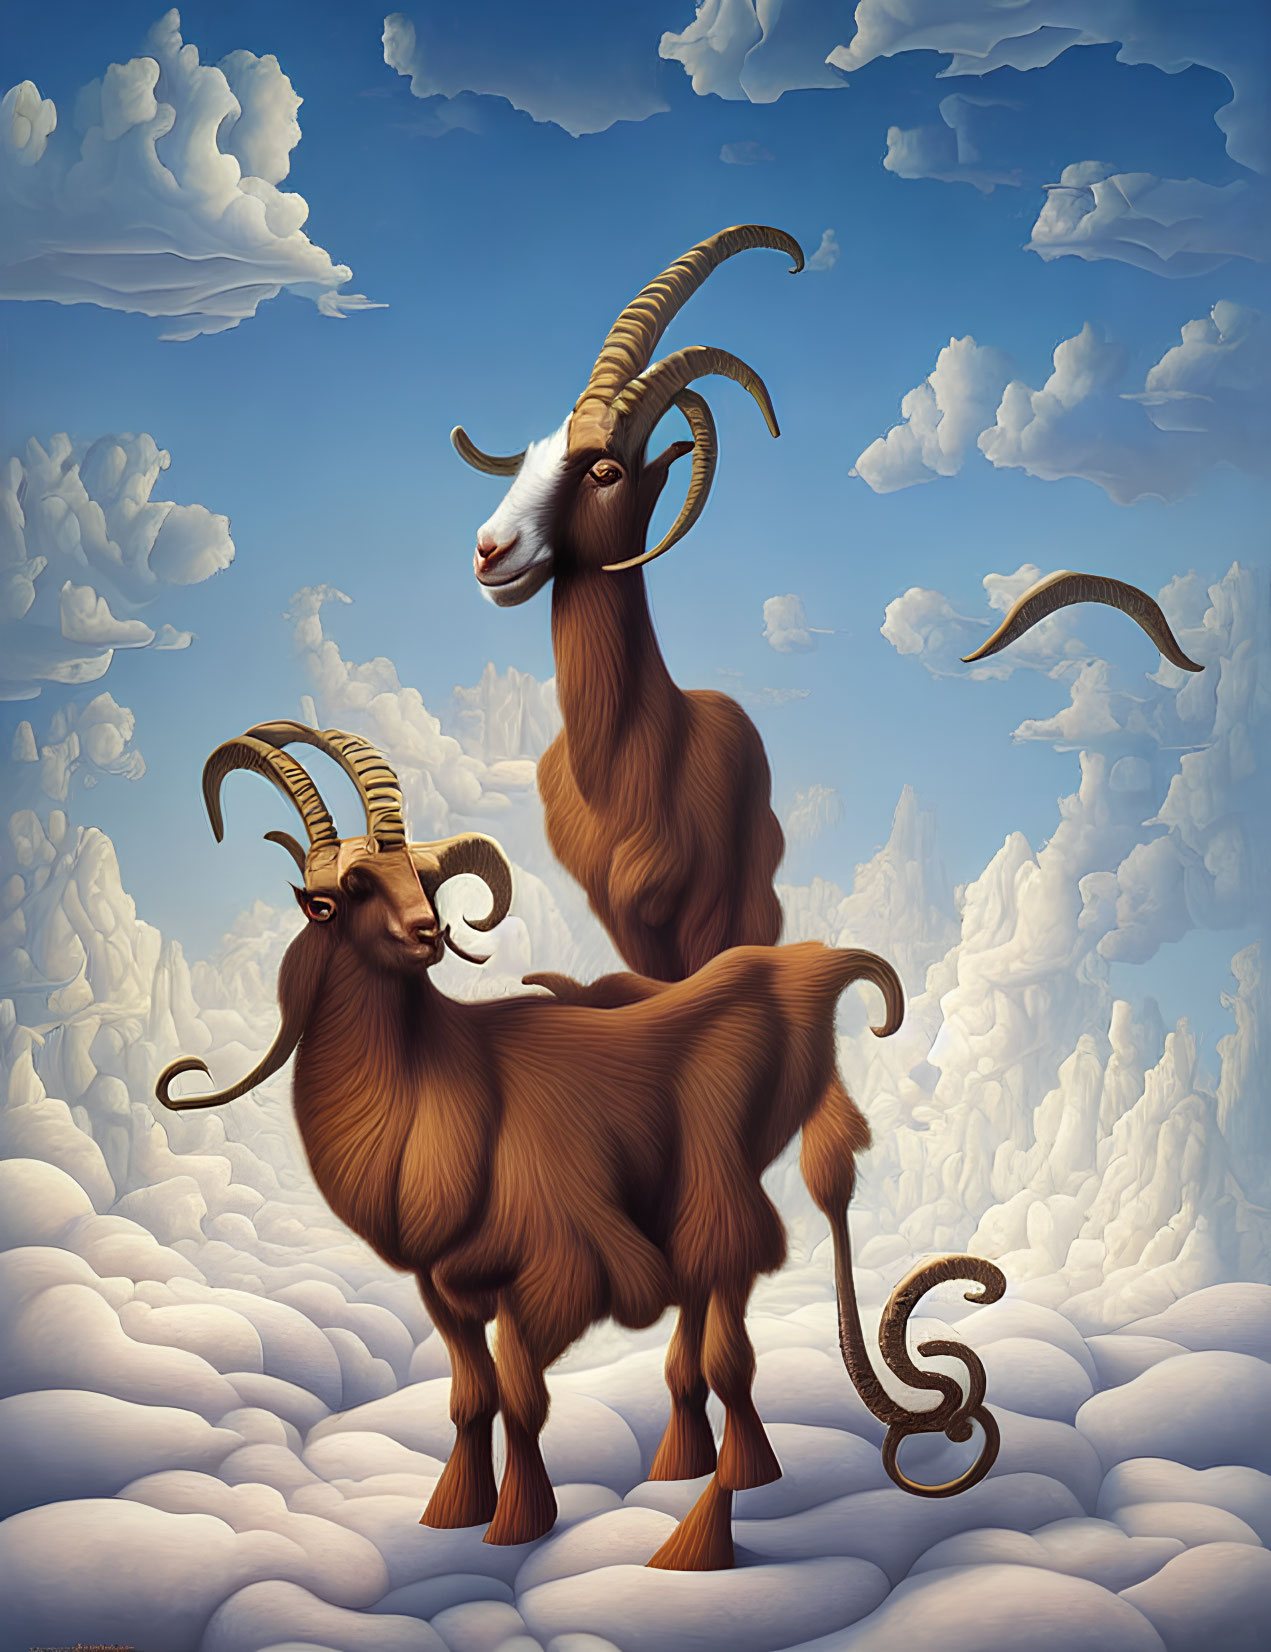 Surreal goats with long horns standing back-to-back against sky and clouds